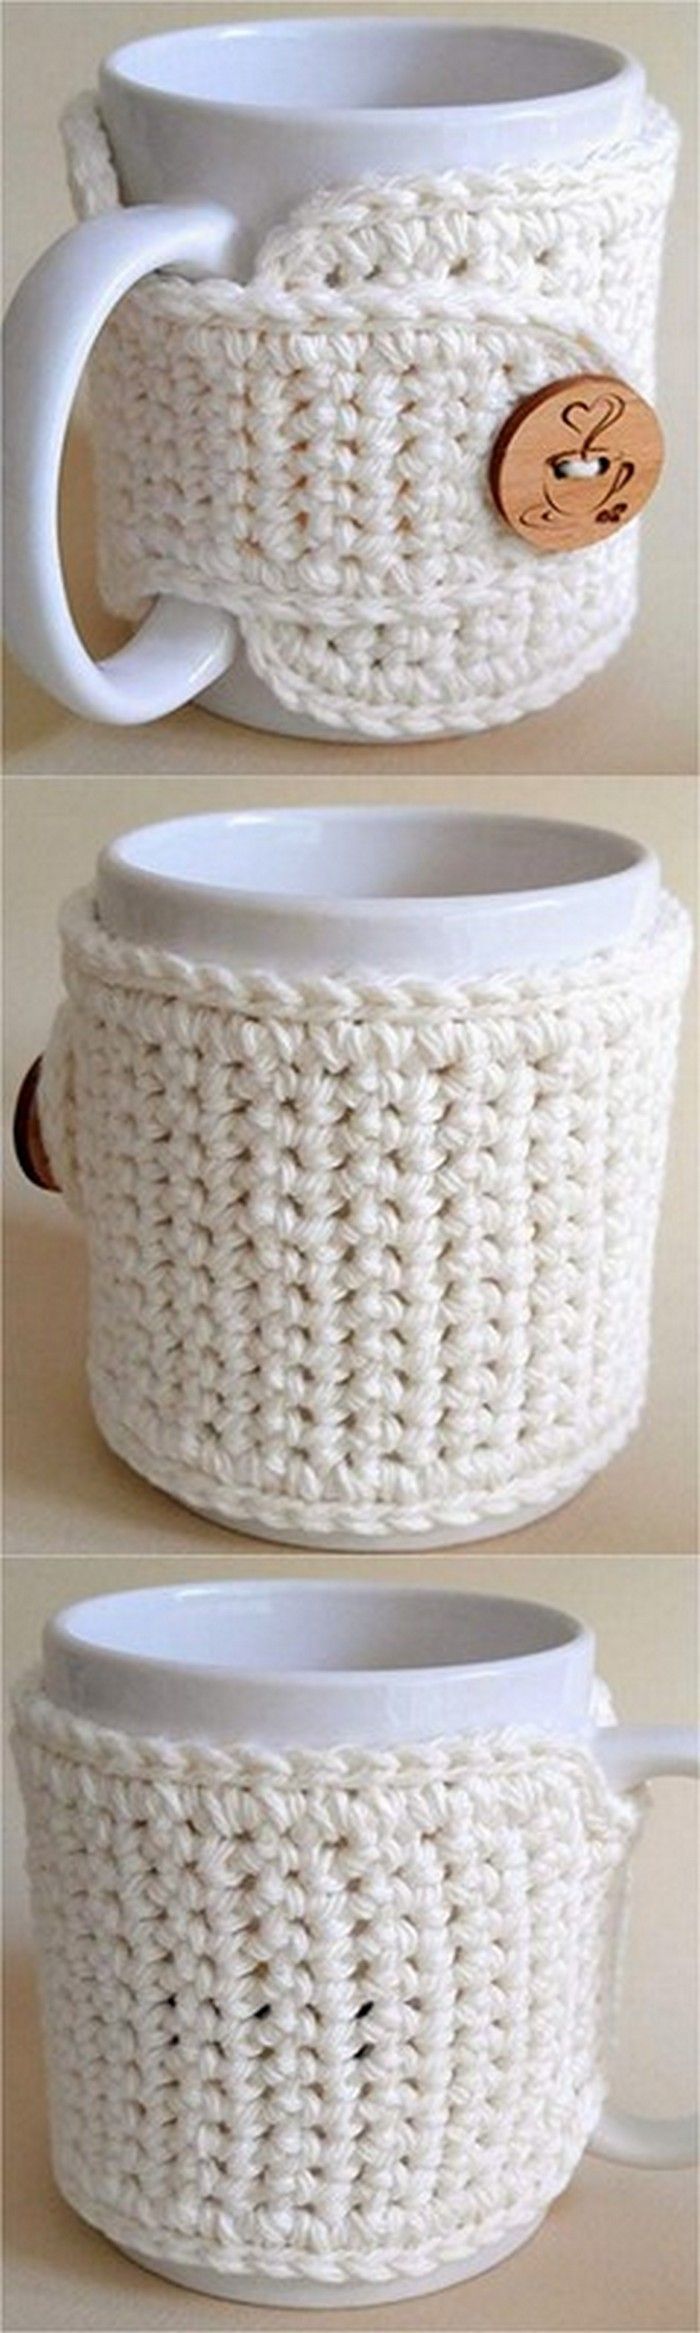 Easy And Adorable Free Crochet Patterns